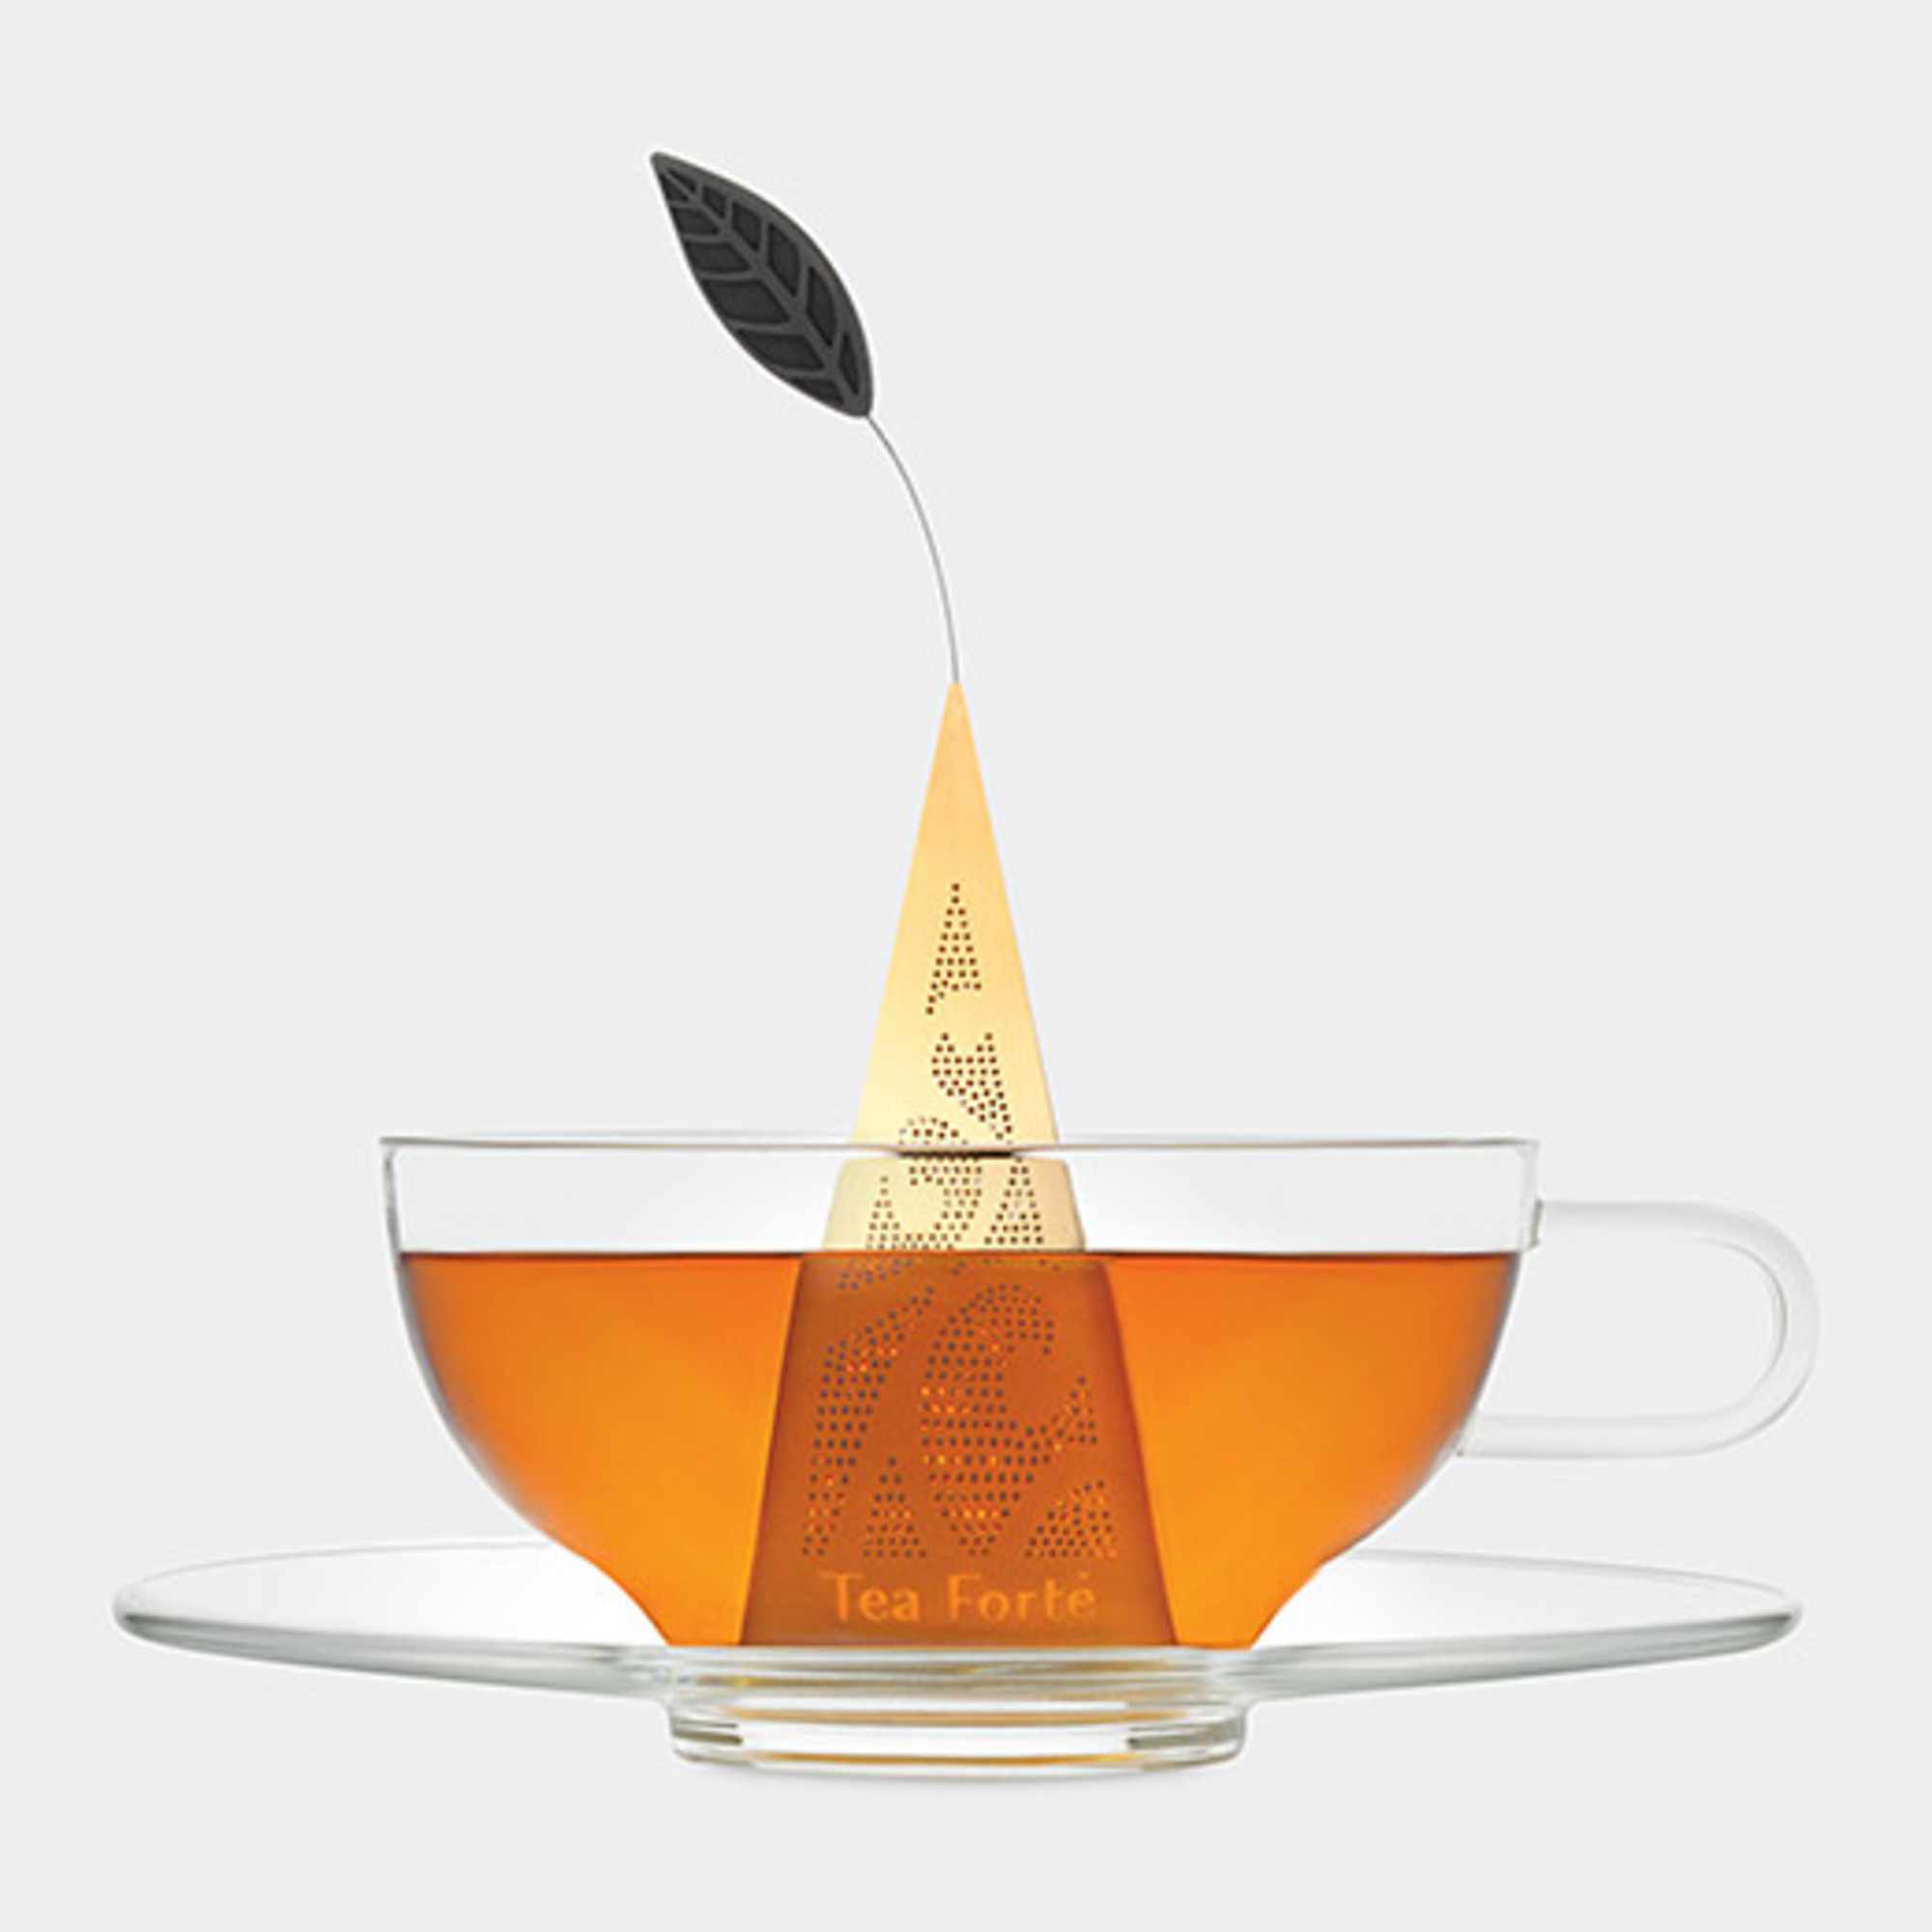 Sundays in Soho: Warm Up to Fall with Tea Forte | MoMA